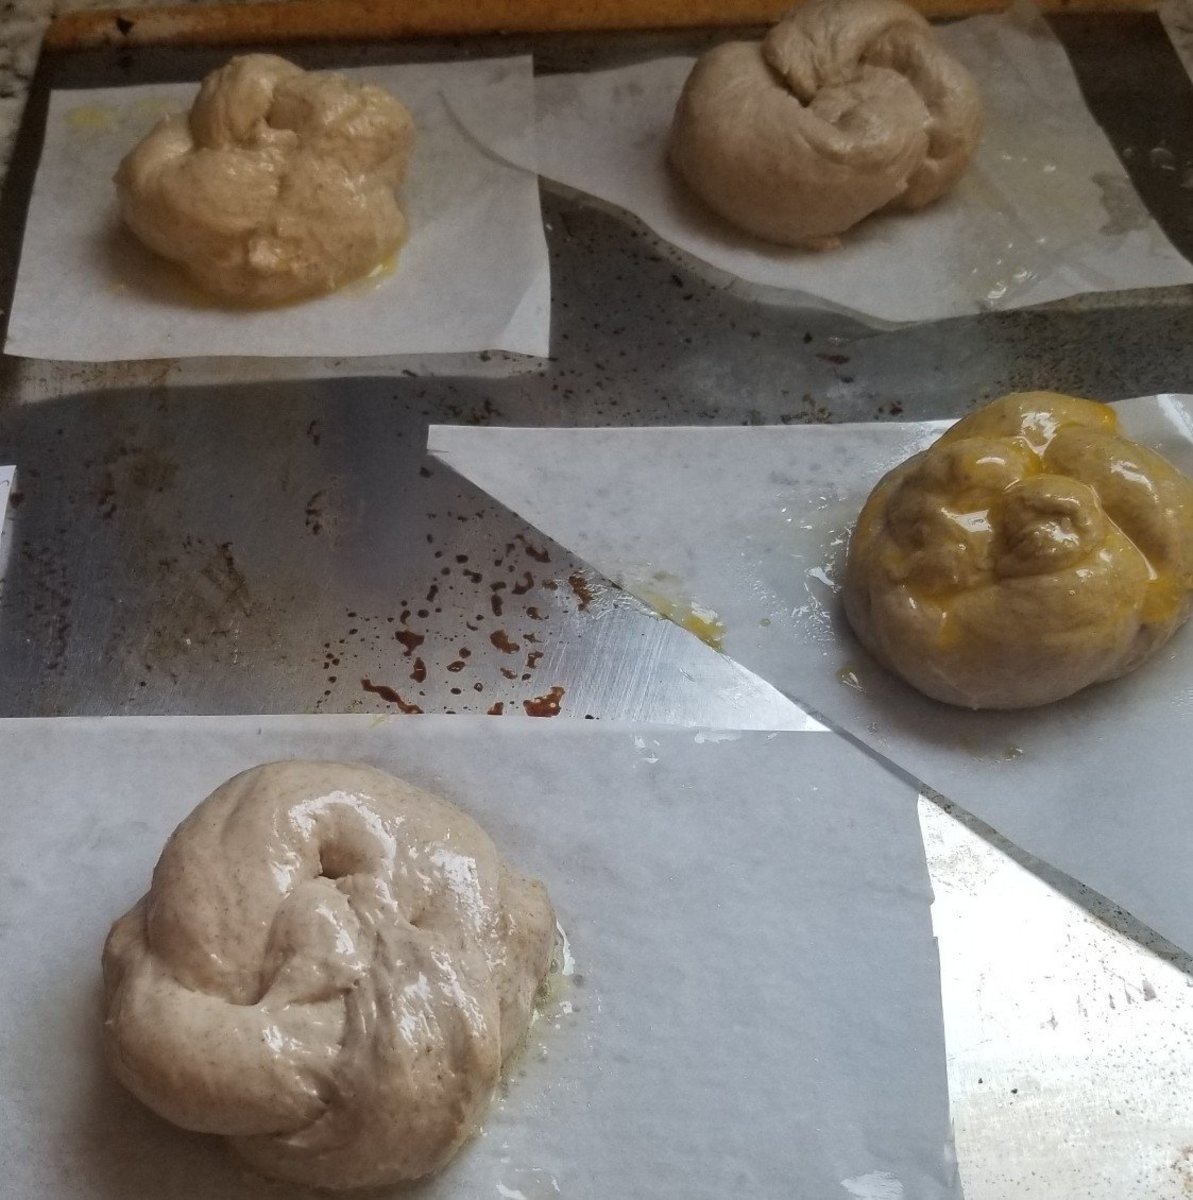 Here are my unbaked, glazed rolls.  The front roll is glazed with butter, and an egg yolk glazes the one on the triangle. There is a water spray on the roll behind it, and the roll on the square is brushed with eggwash.